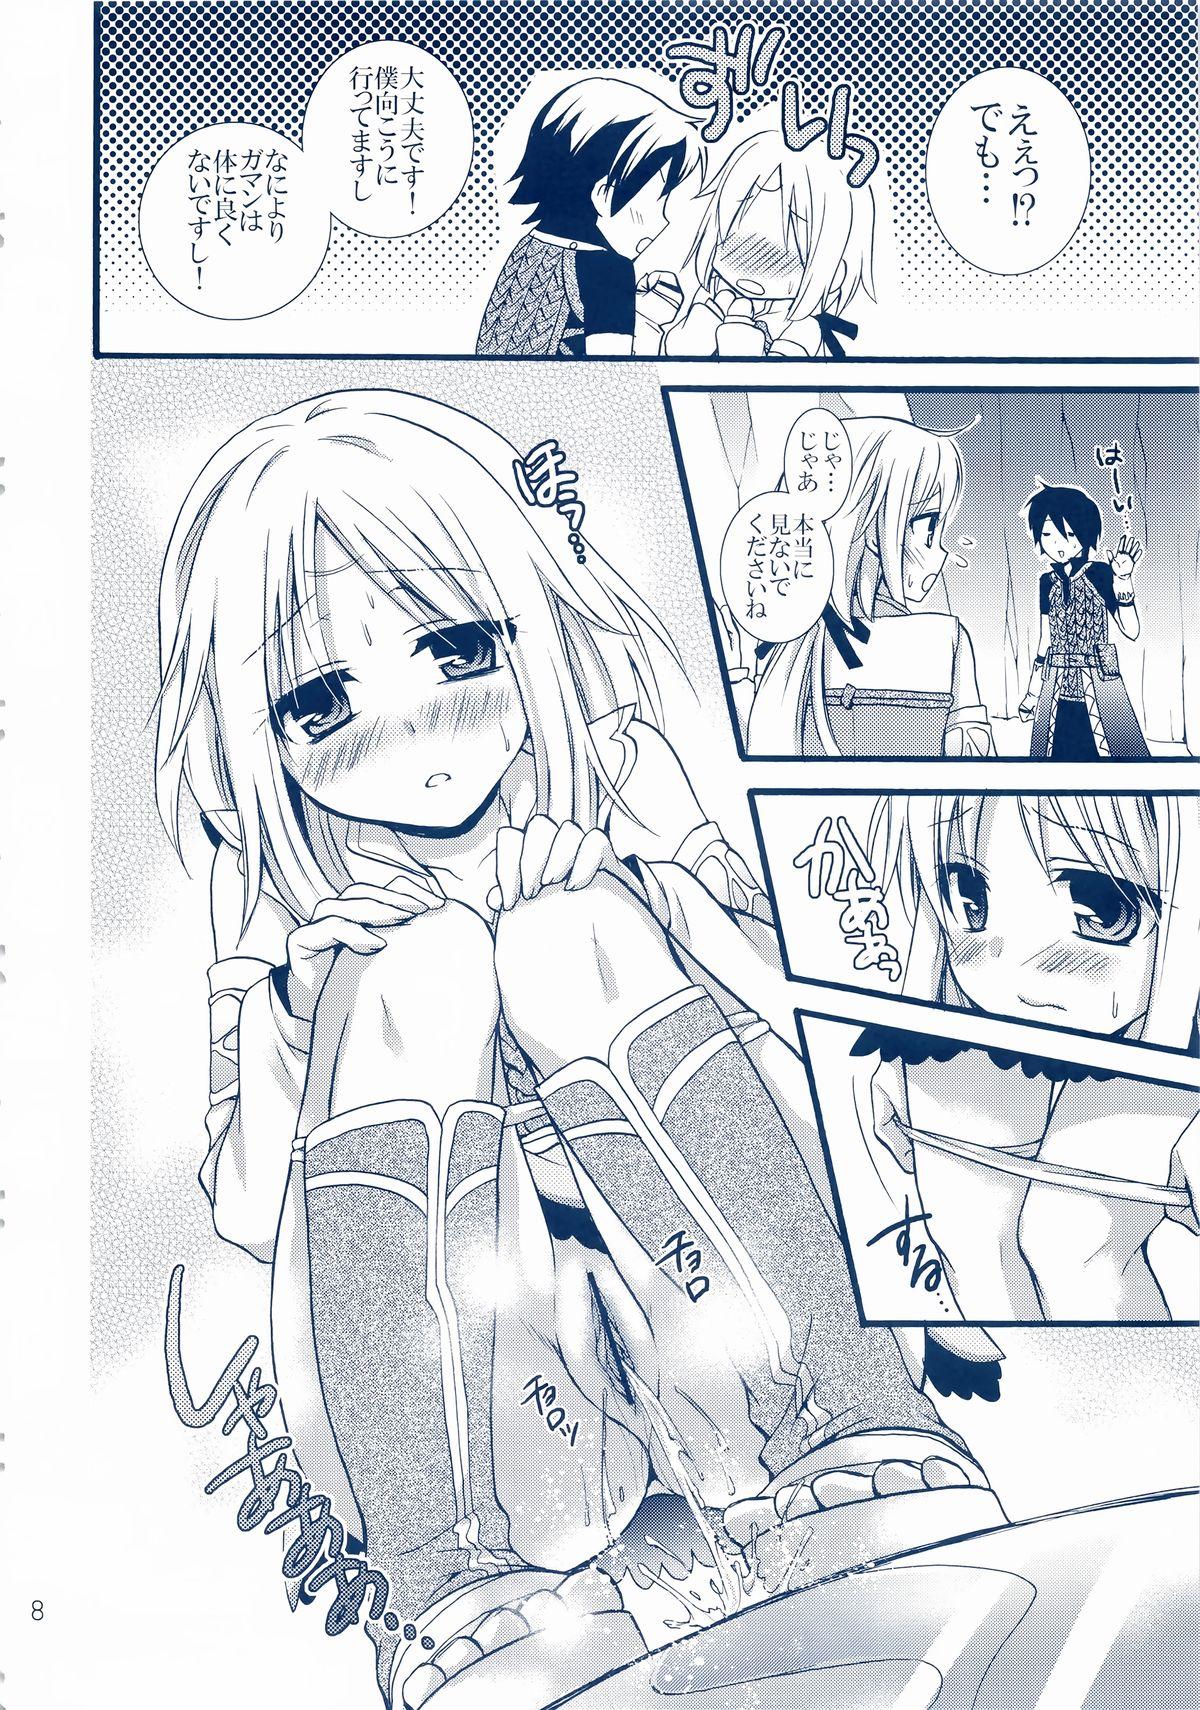 Asses Mezase Dungeon Master - Rune factory Load - Page 8